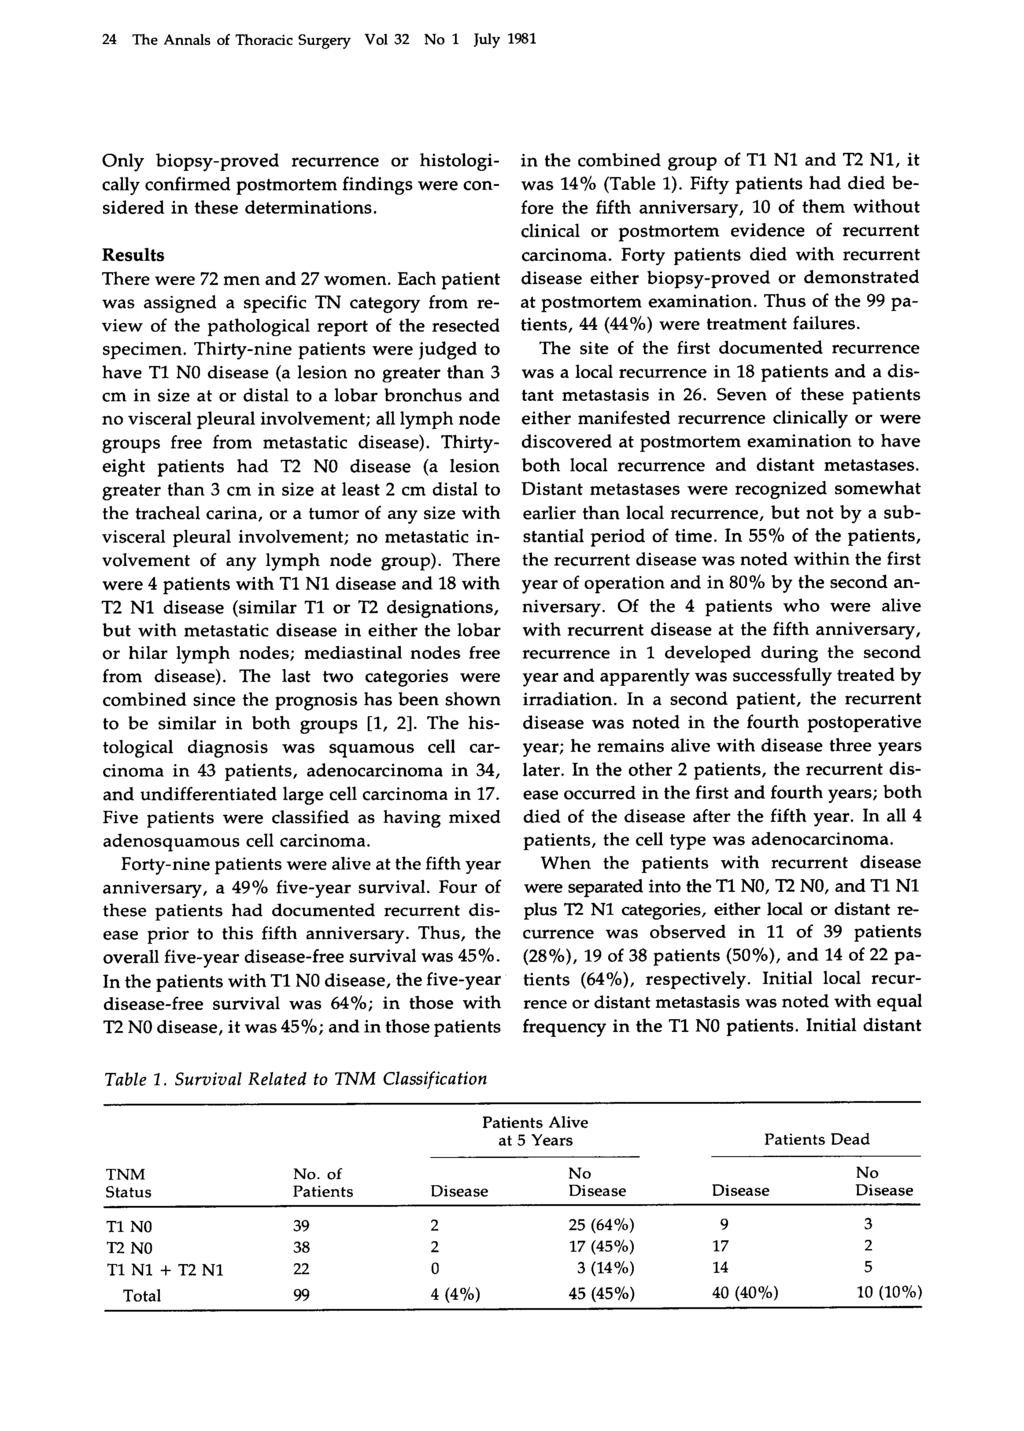 24 The Annals of Thoracic Surgery Vol 32 No 1 July 1981 Only biopsy-proved recurrence or histologically confirmed postmortem findings were considered in these determinations.